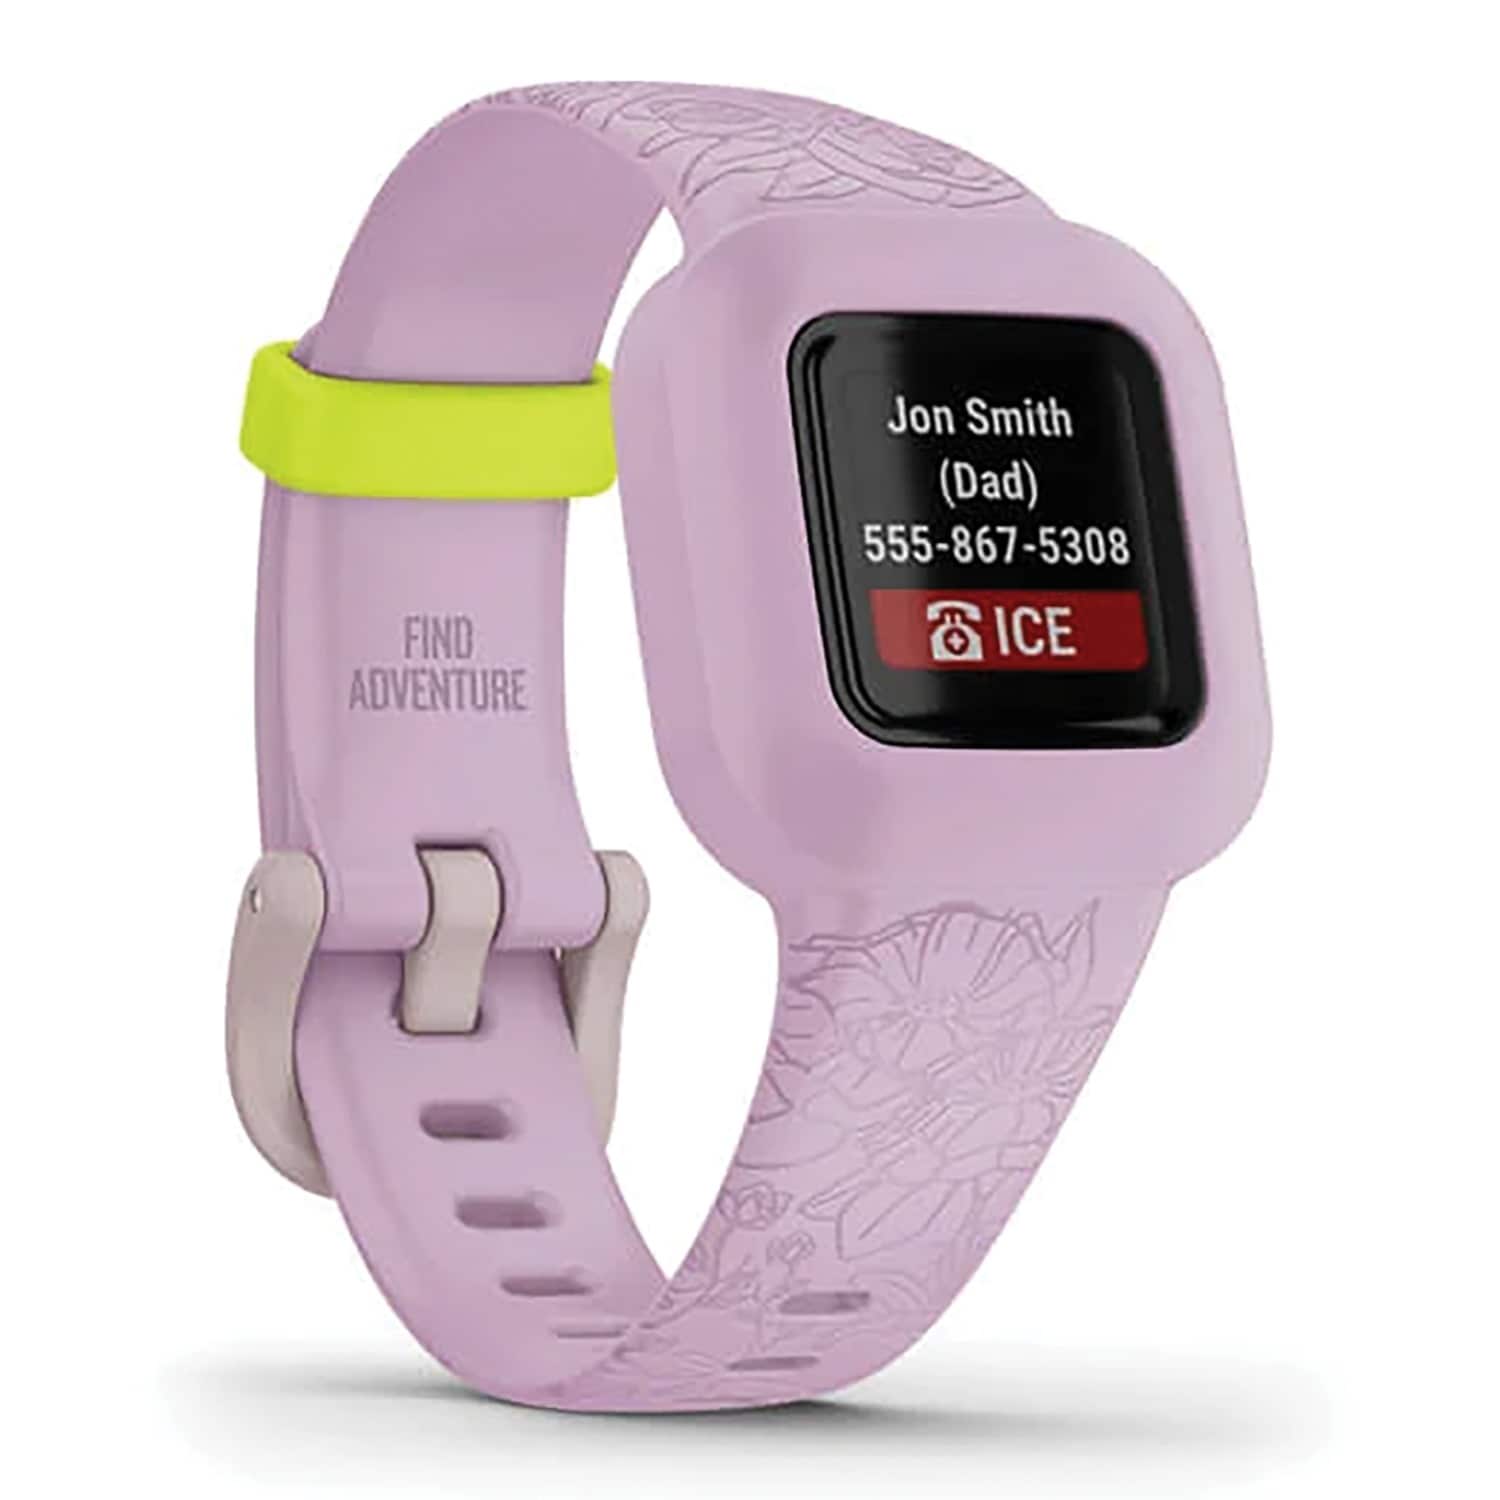 Garmin vívofit jr. Fitness with Step Counter, in Fitness Trackers department at Lowes.com